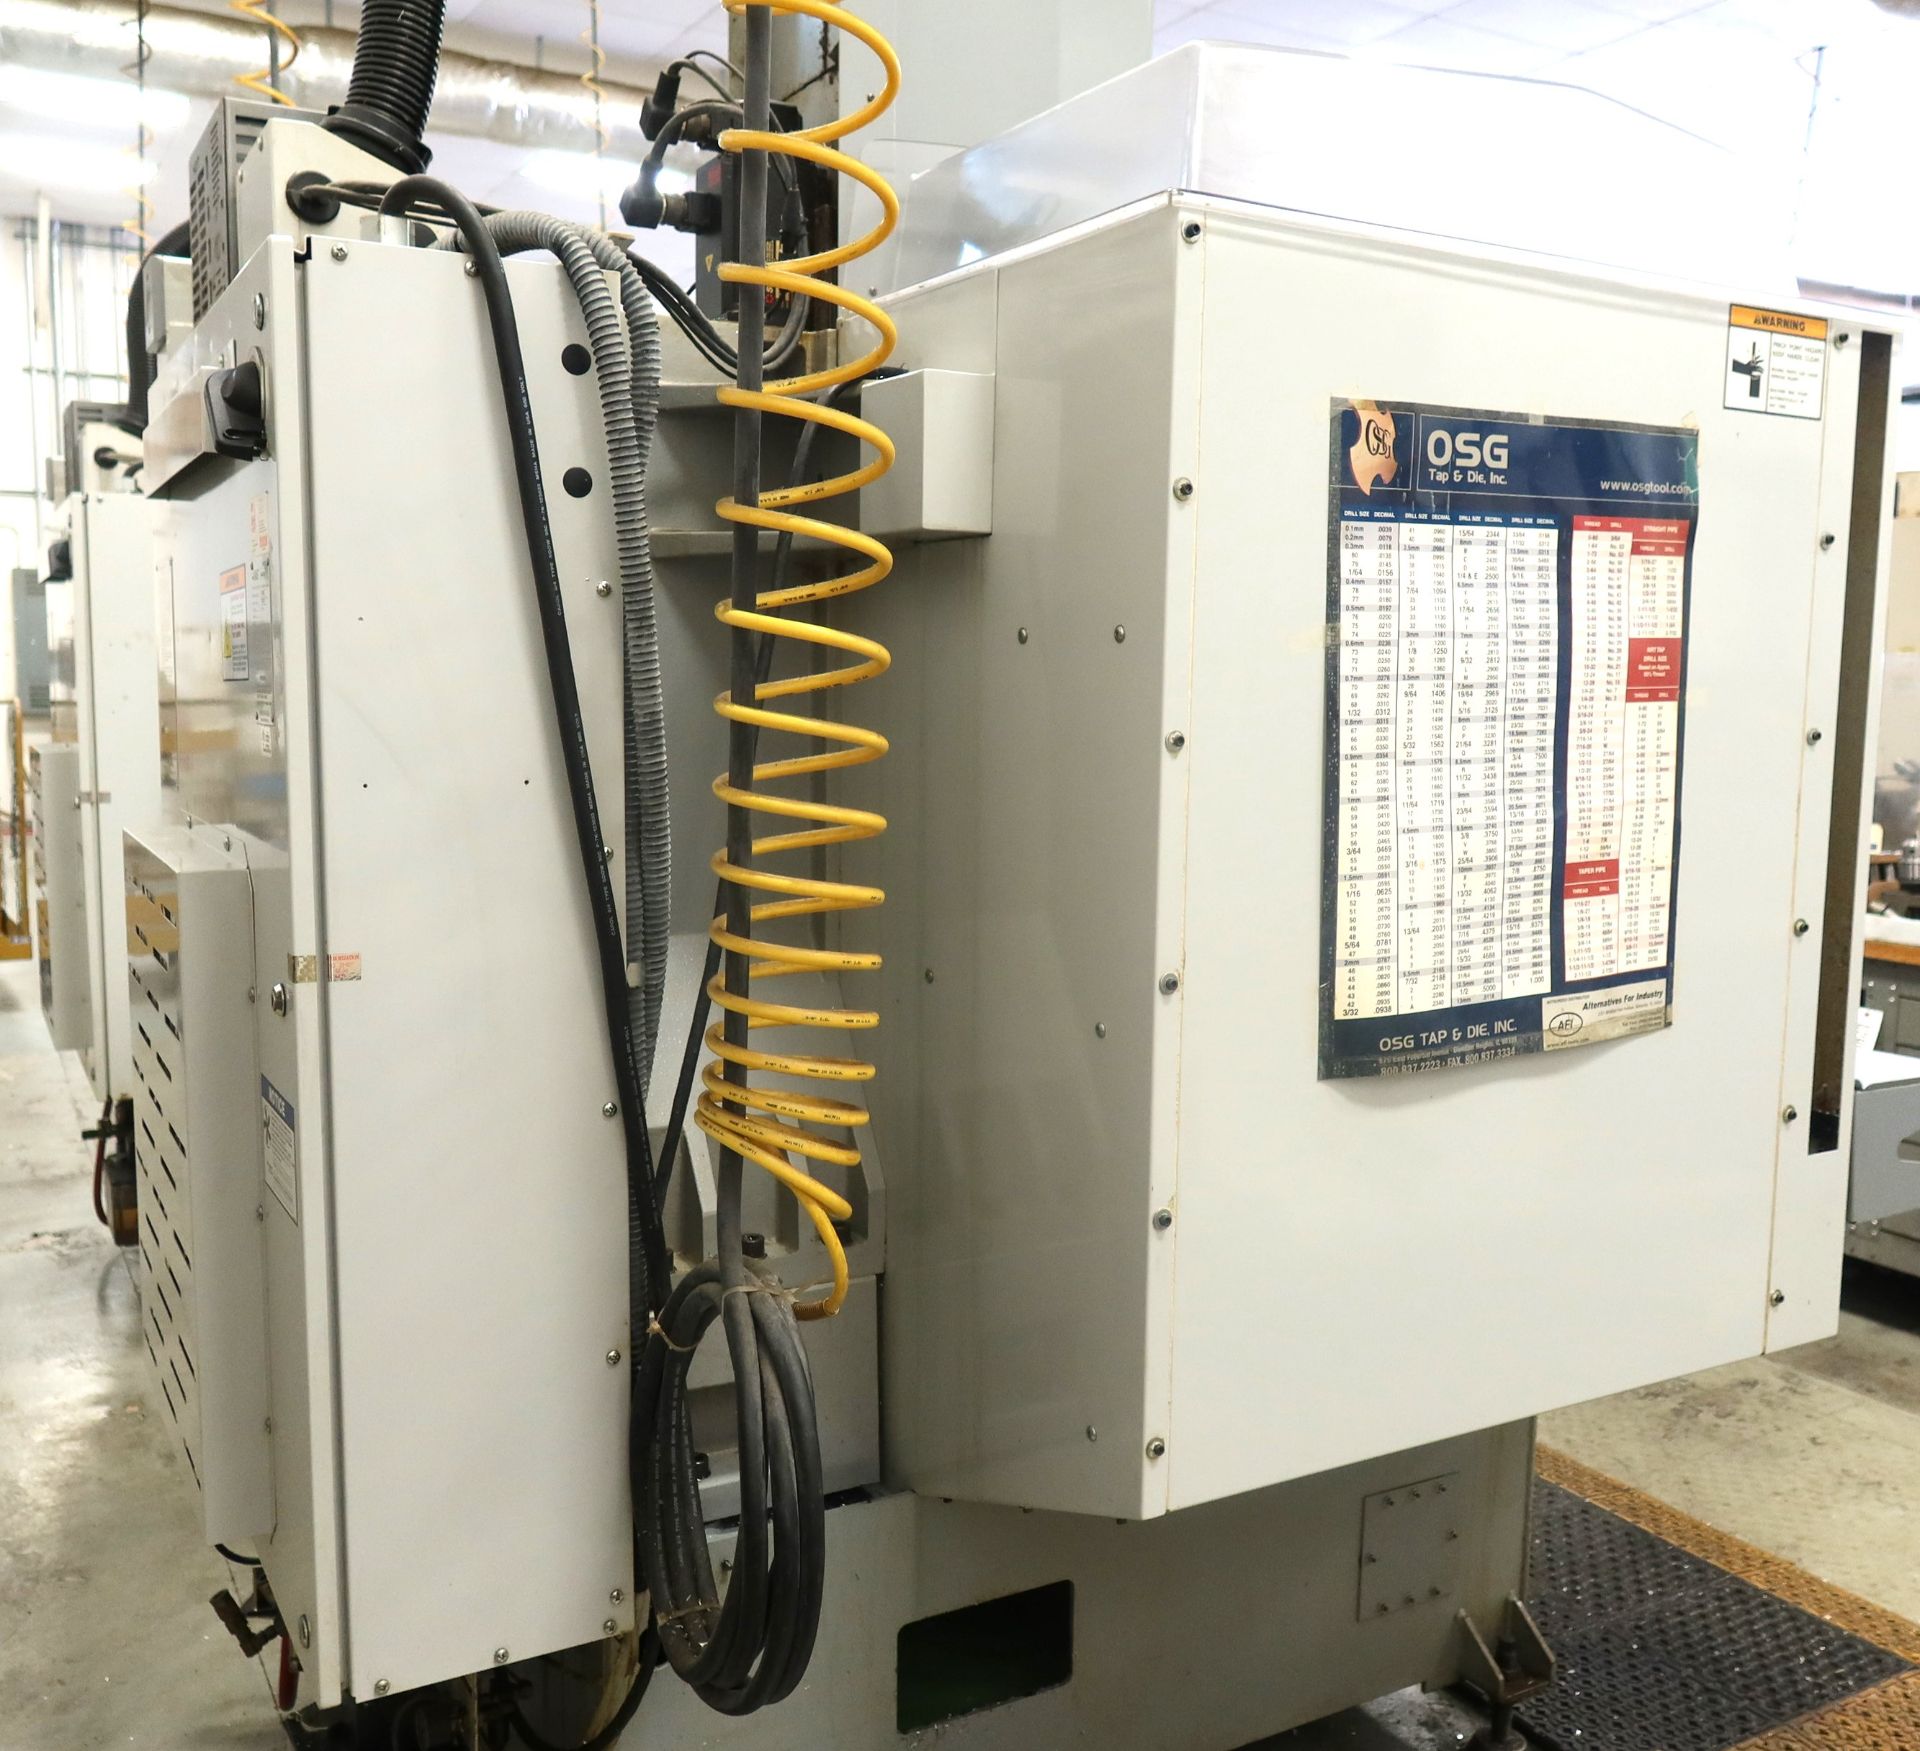 2006 Haas Super Mini Mill 4-axis CNC Vertical Machining Center, SN 46185 - Image 6 of 8